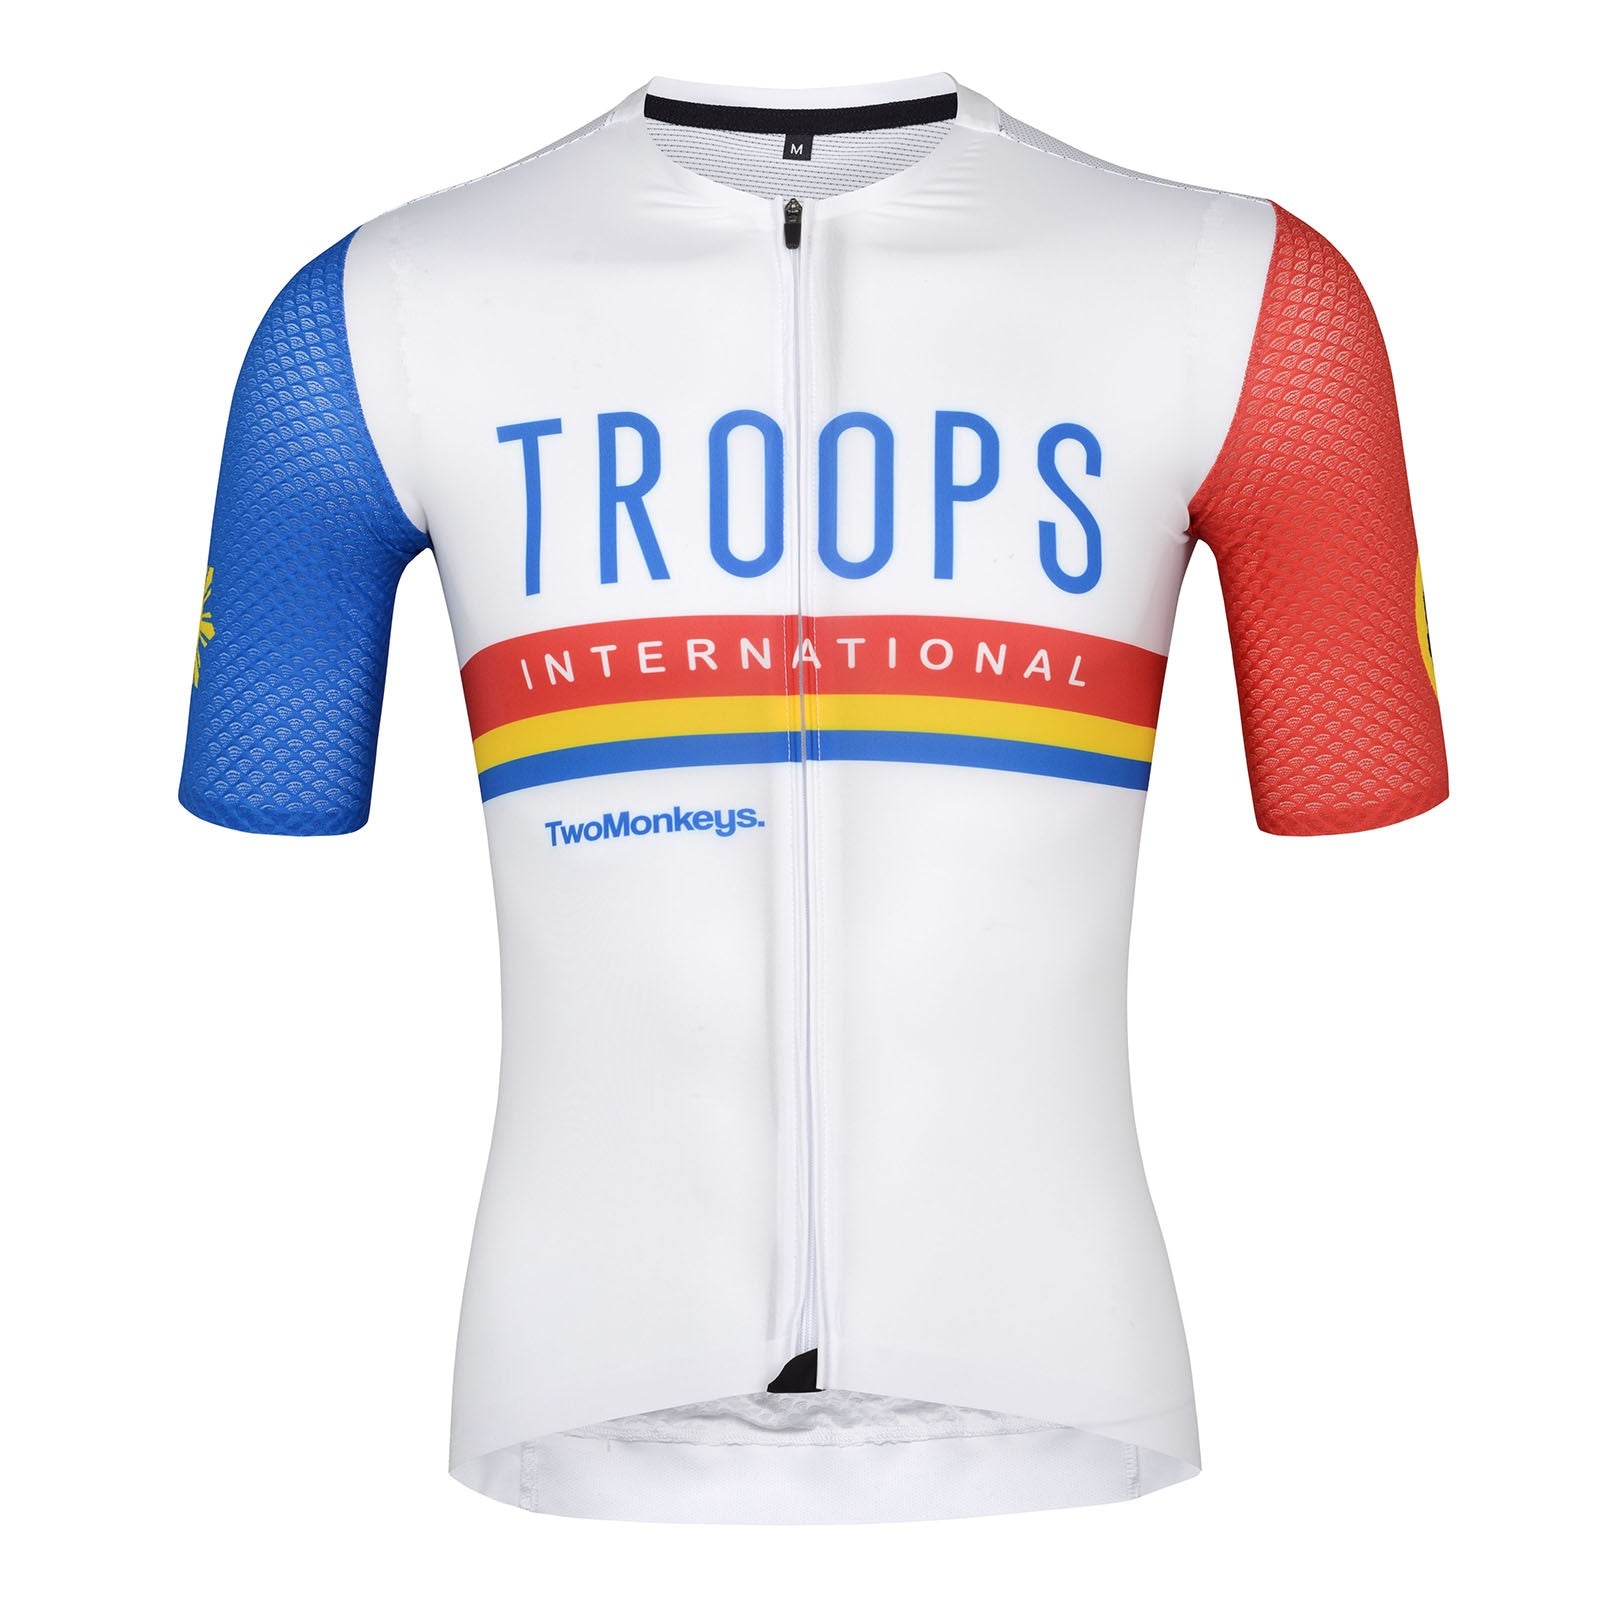 The Kababayan Troops International Jersey